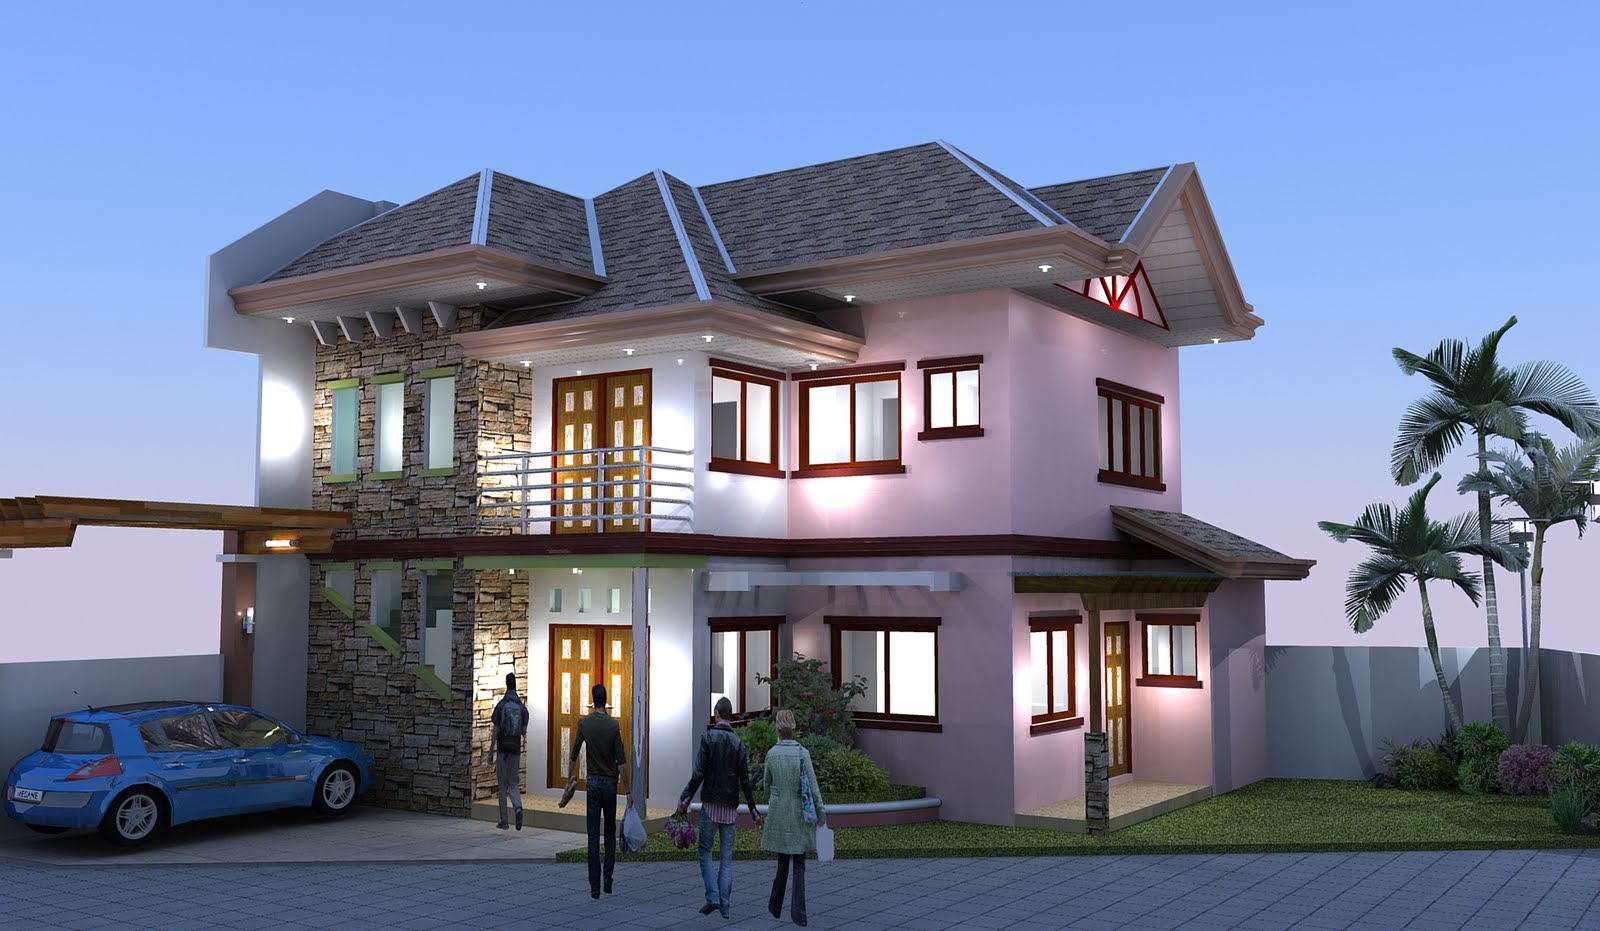 ADC Drafting Design Render Two storey residential building